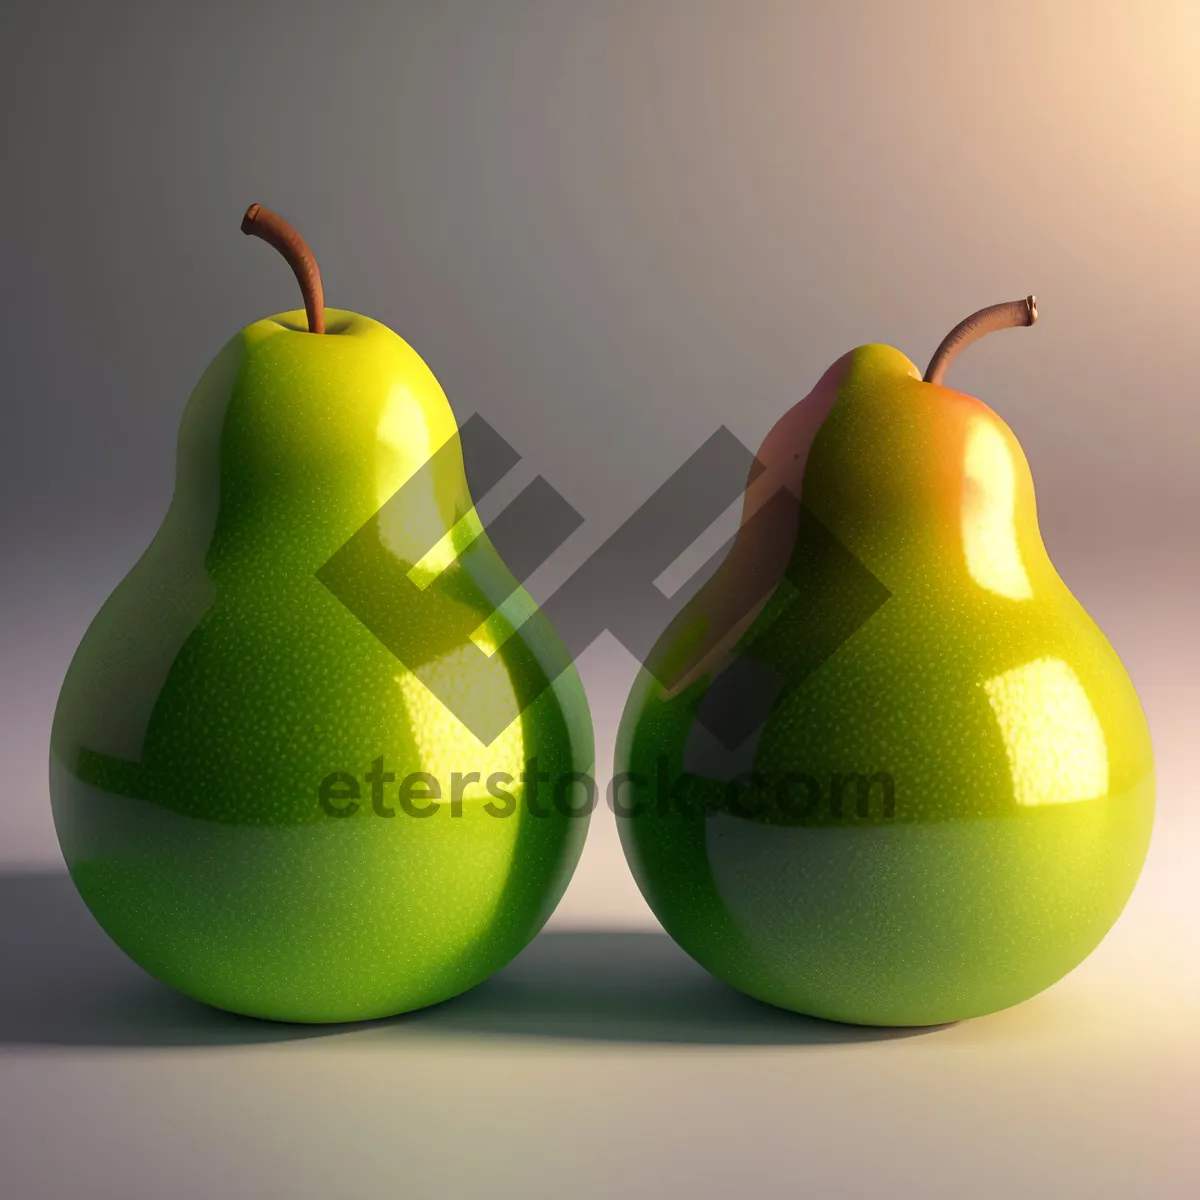 Picture of Delicious Organic Pear, a Sweet and Juicy Source of Nutrition